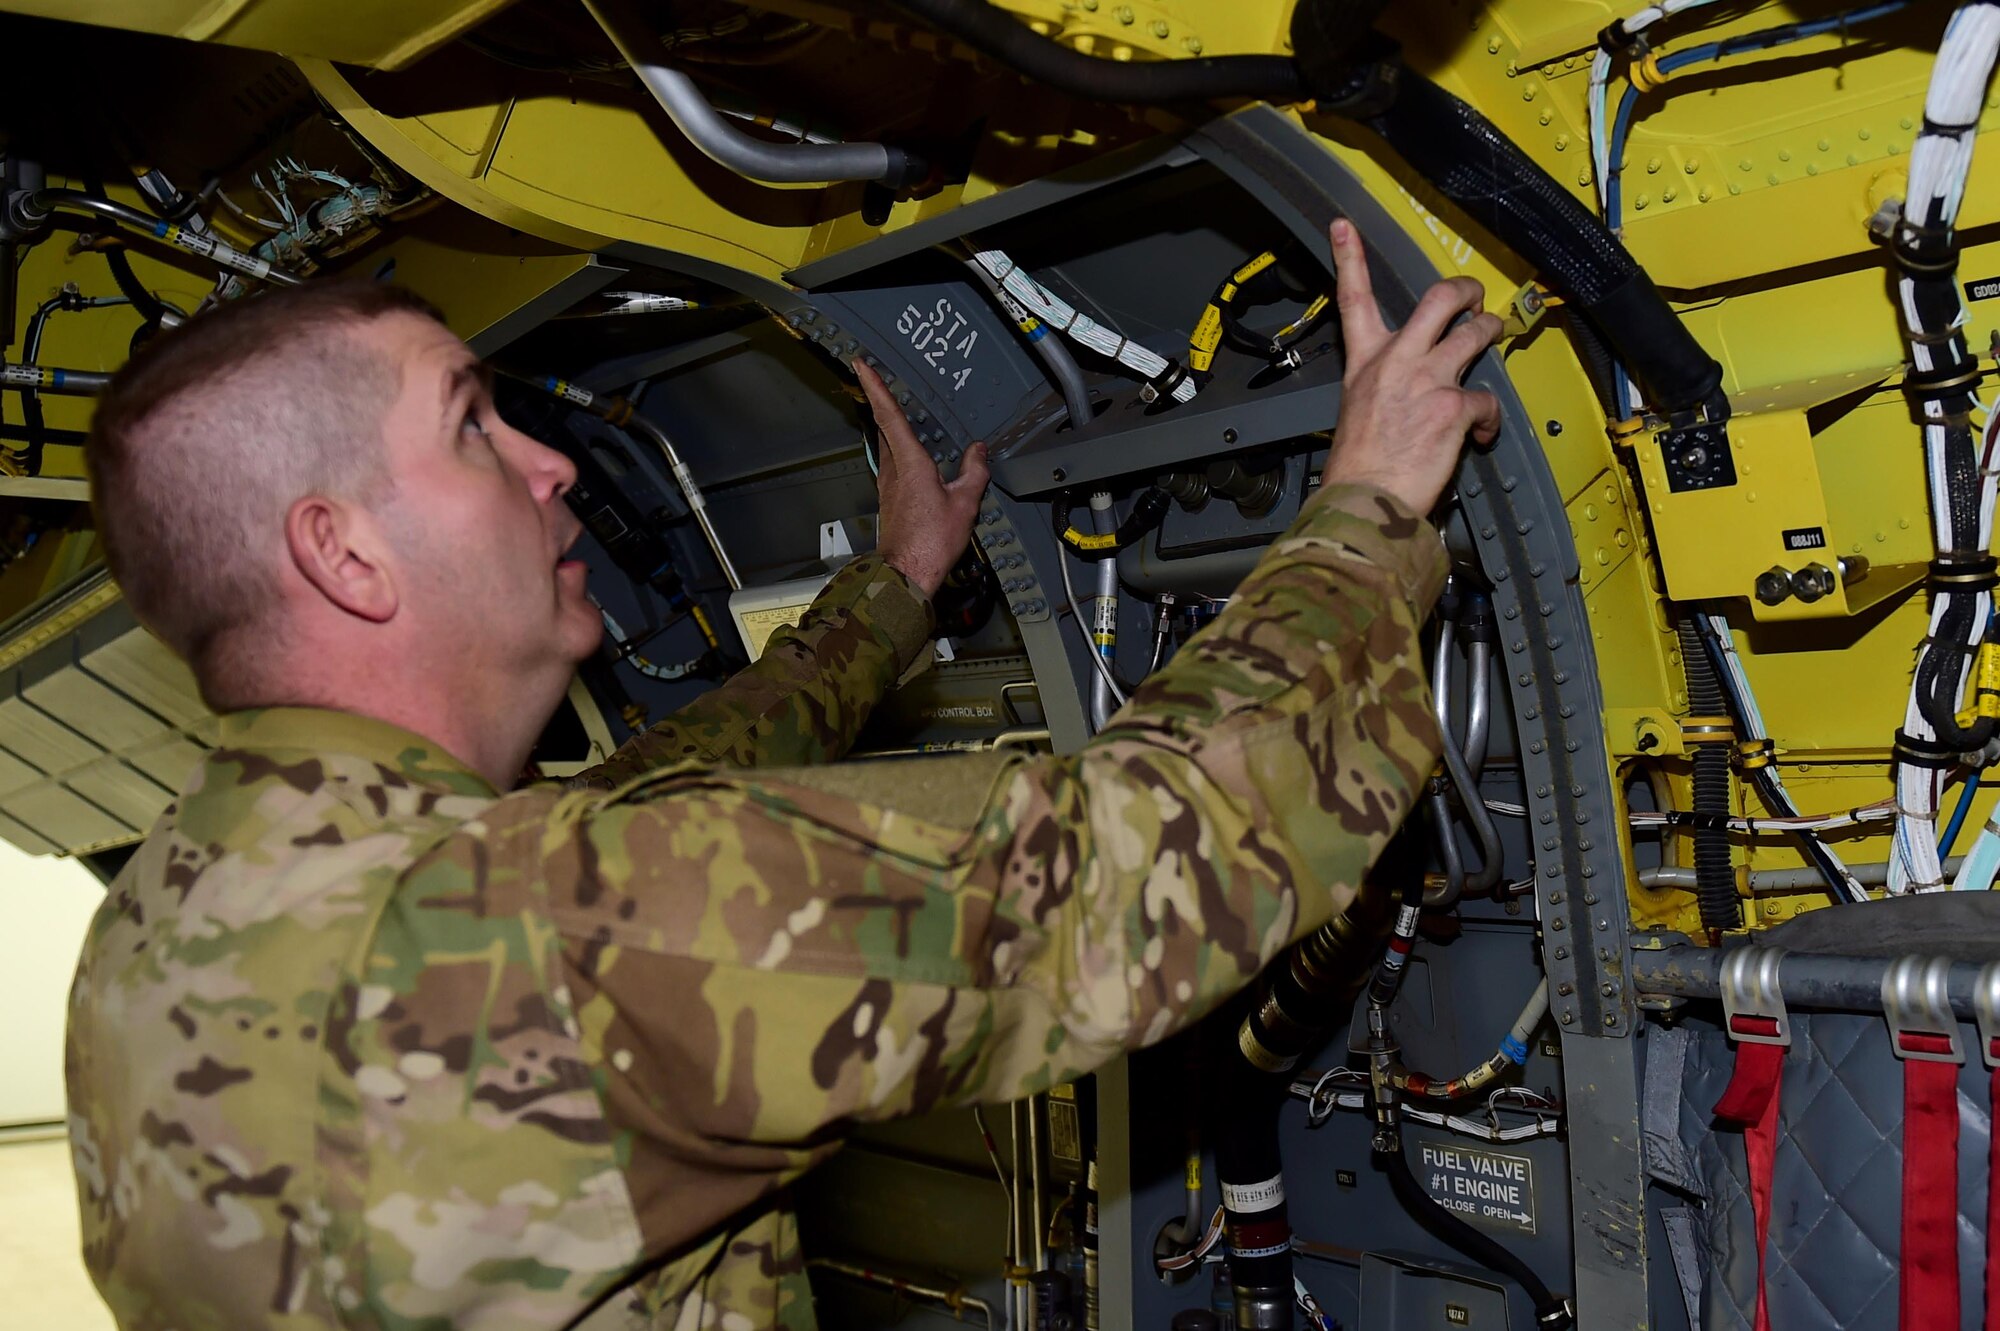 U.S. Army Staff Sgt. Wade Shore, Colorado Army National Guard CH-47 crew chief, displays part of the Chinook helicopter that he is accountable for maintaining March 3, 2016, at the Army Aviation Support Facility on Buckley Air Force Base, Colo. Crew chiefs must maintain the aircraft, crew, load, and passengers’ safety before, during and after flight. (U.S. Air Force photo by Airman 1st Class Gabrielle Spradling/Released)